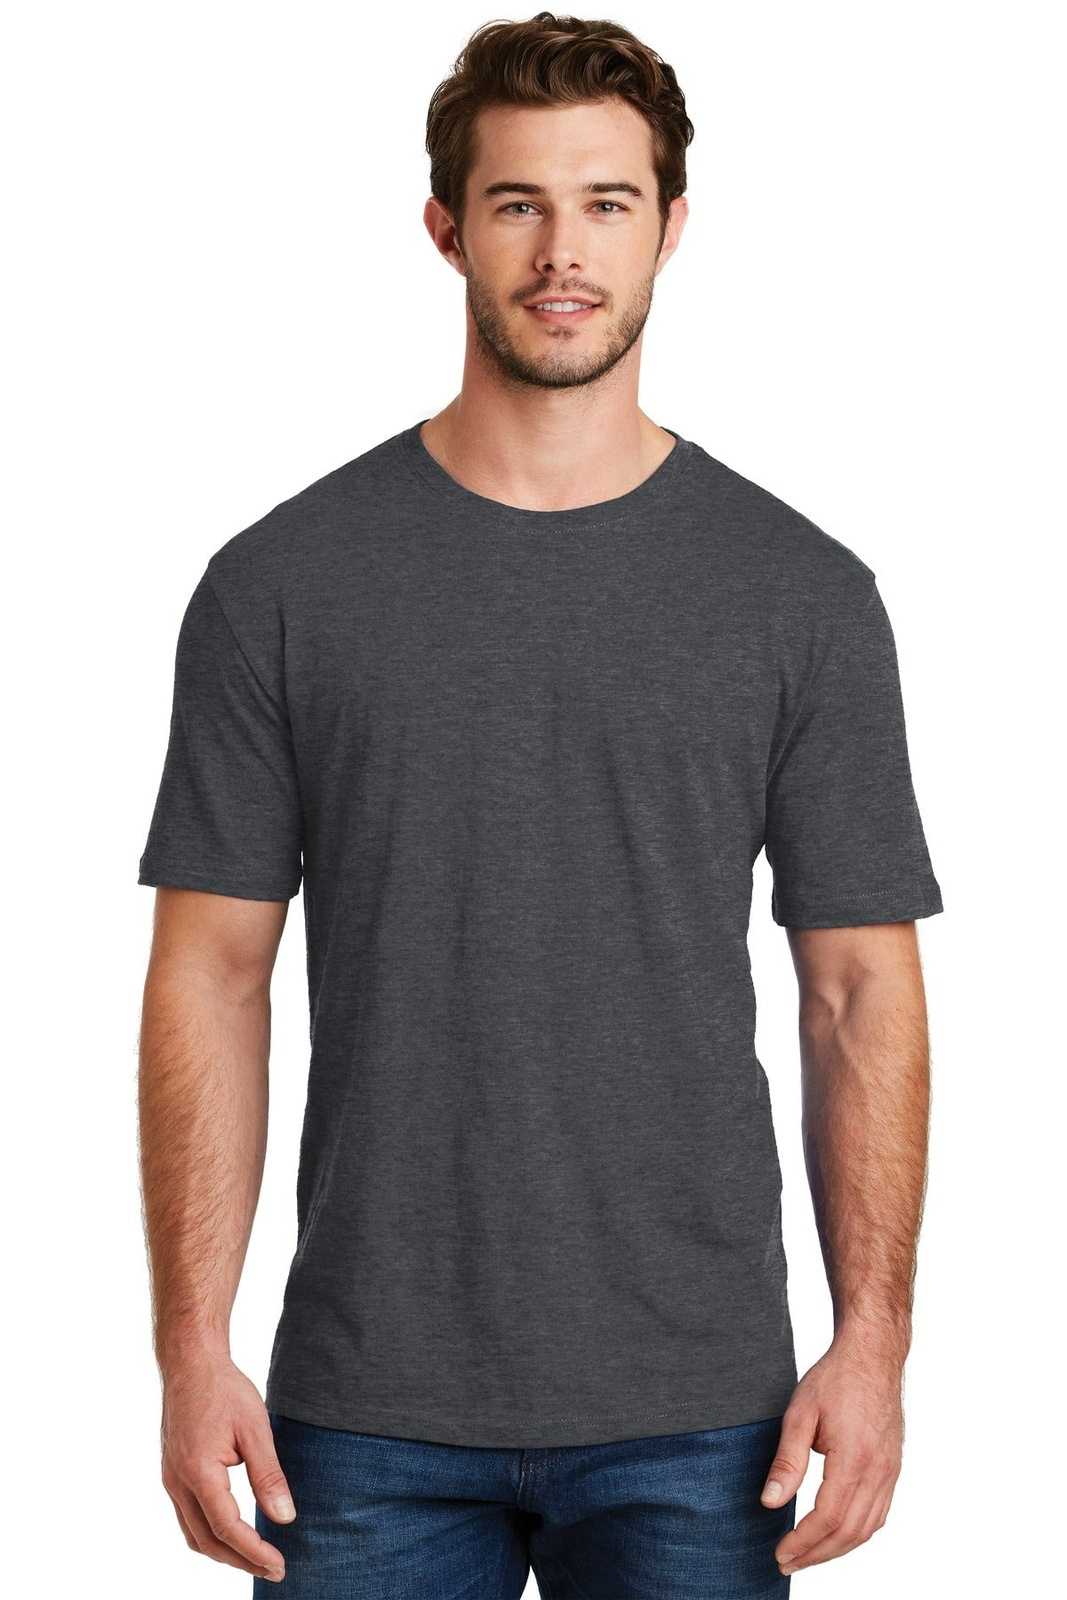 District DM108 Perfect Blend Tee - Heathered Charcoal - HIT a Double - 1